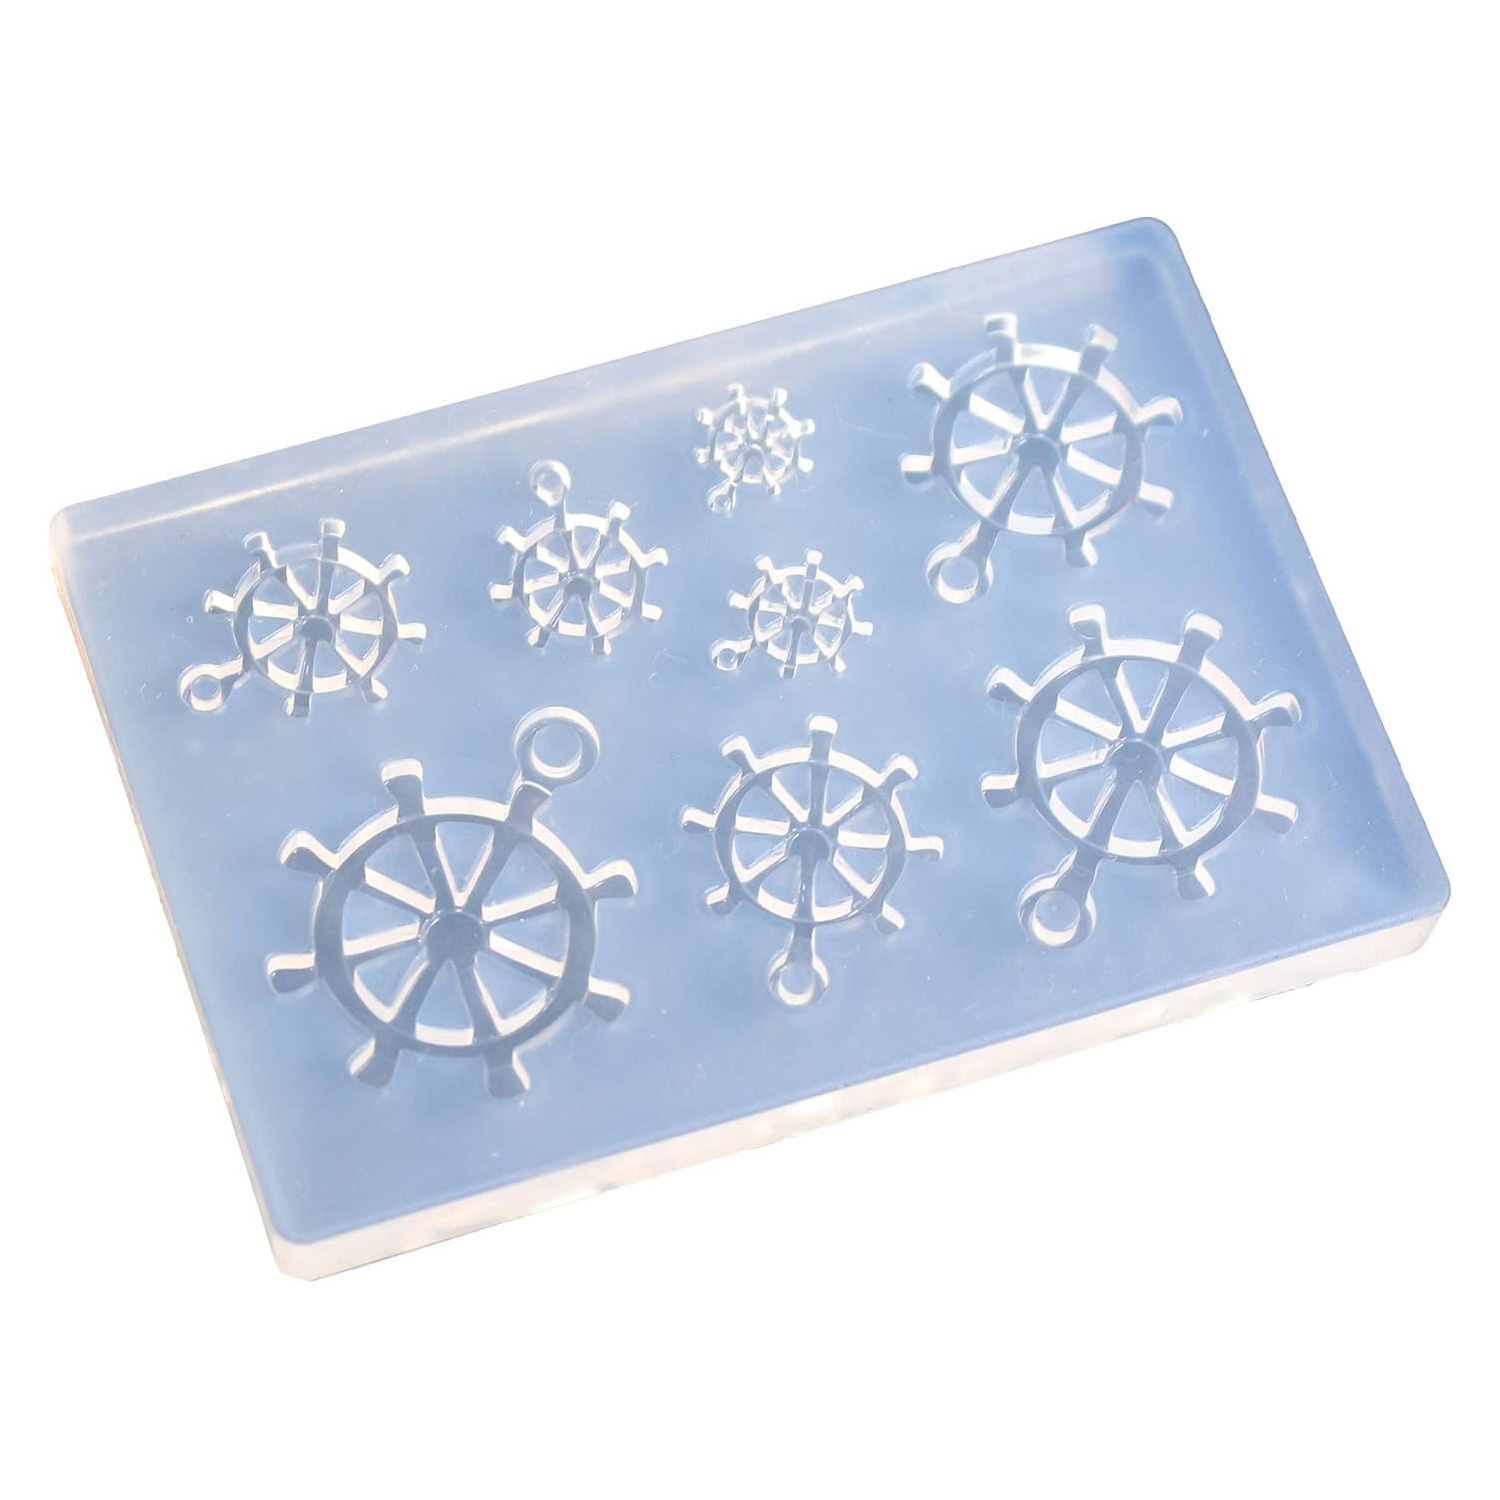 KAM-REJ-606  Resin Crafting Silicone Mold  (pcs)